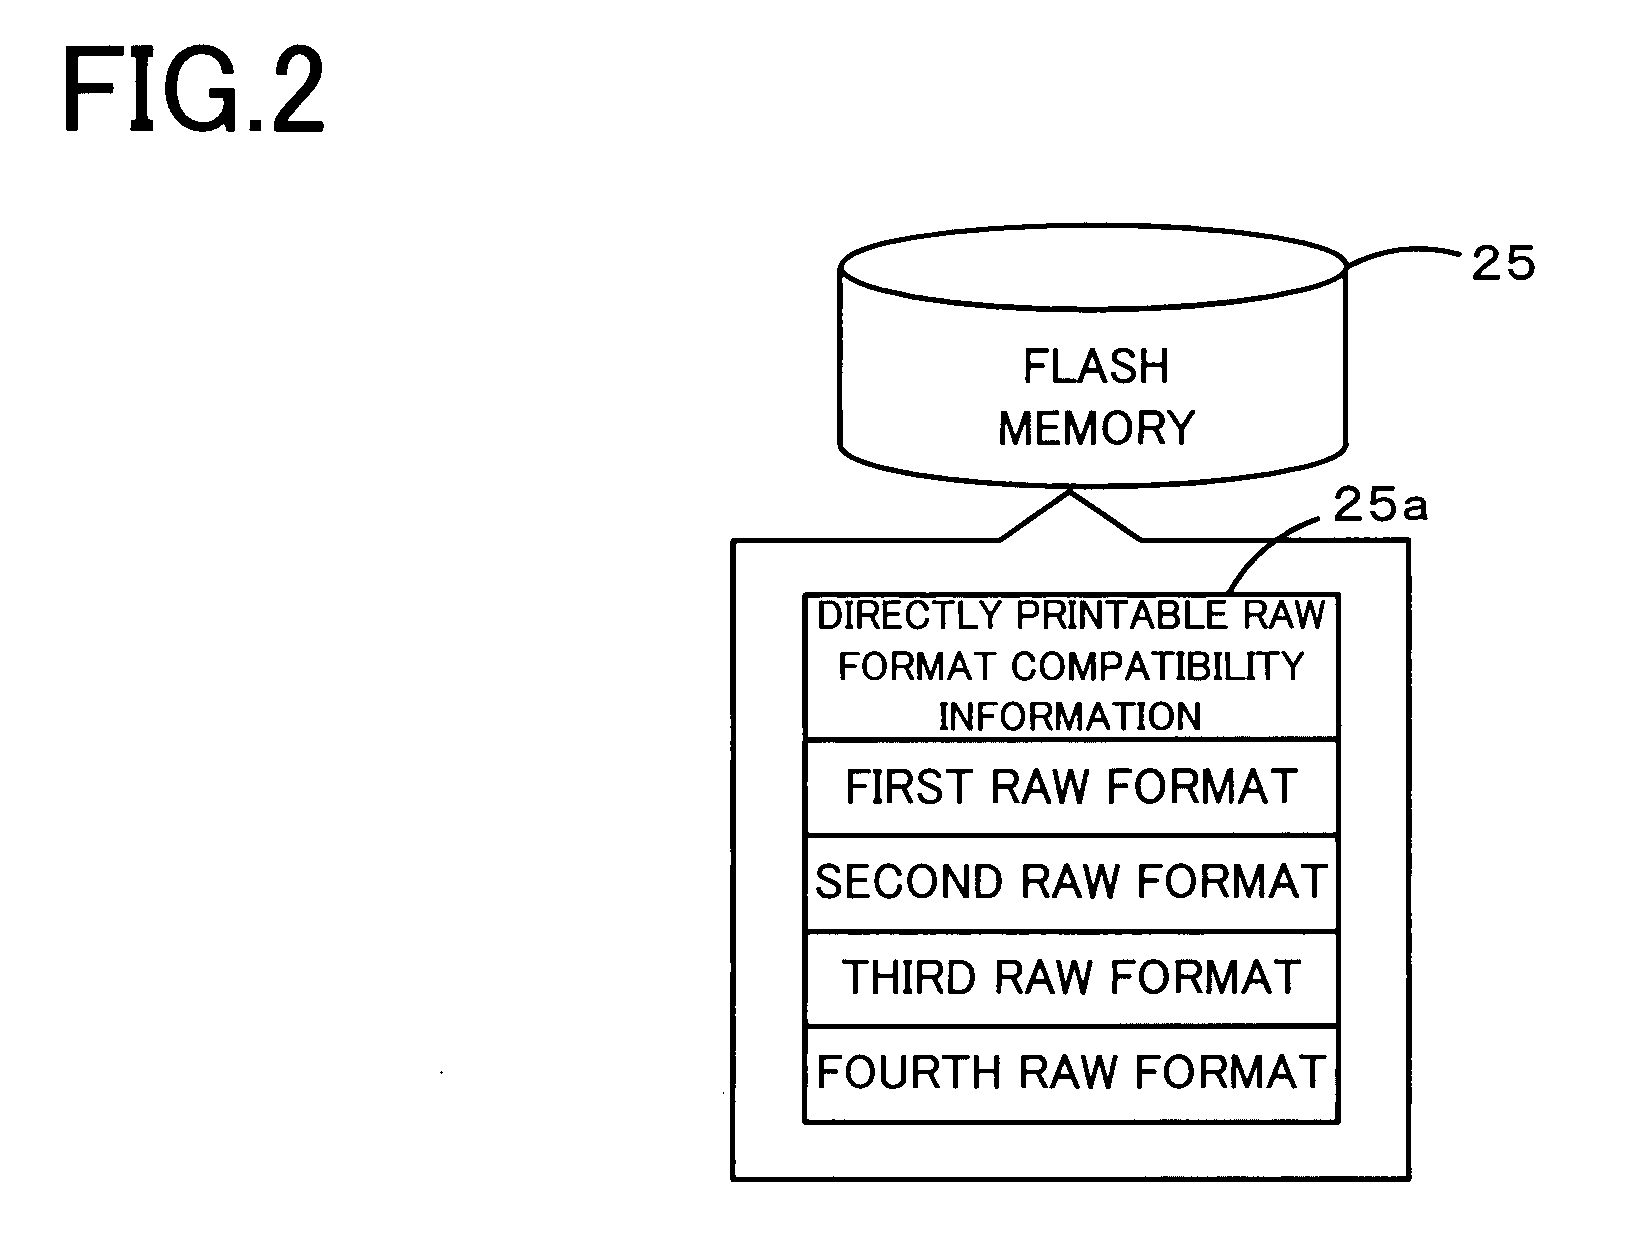 Image output device, image processing apparatus, image output and image processing system, and method therefore